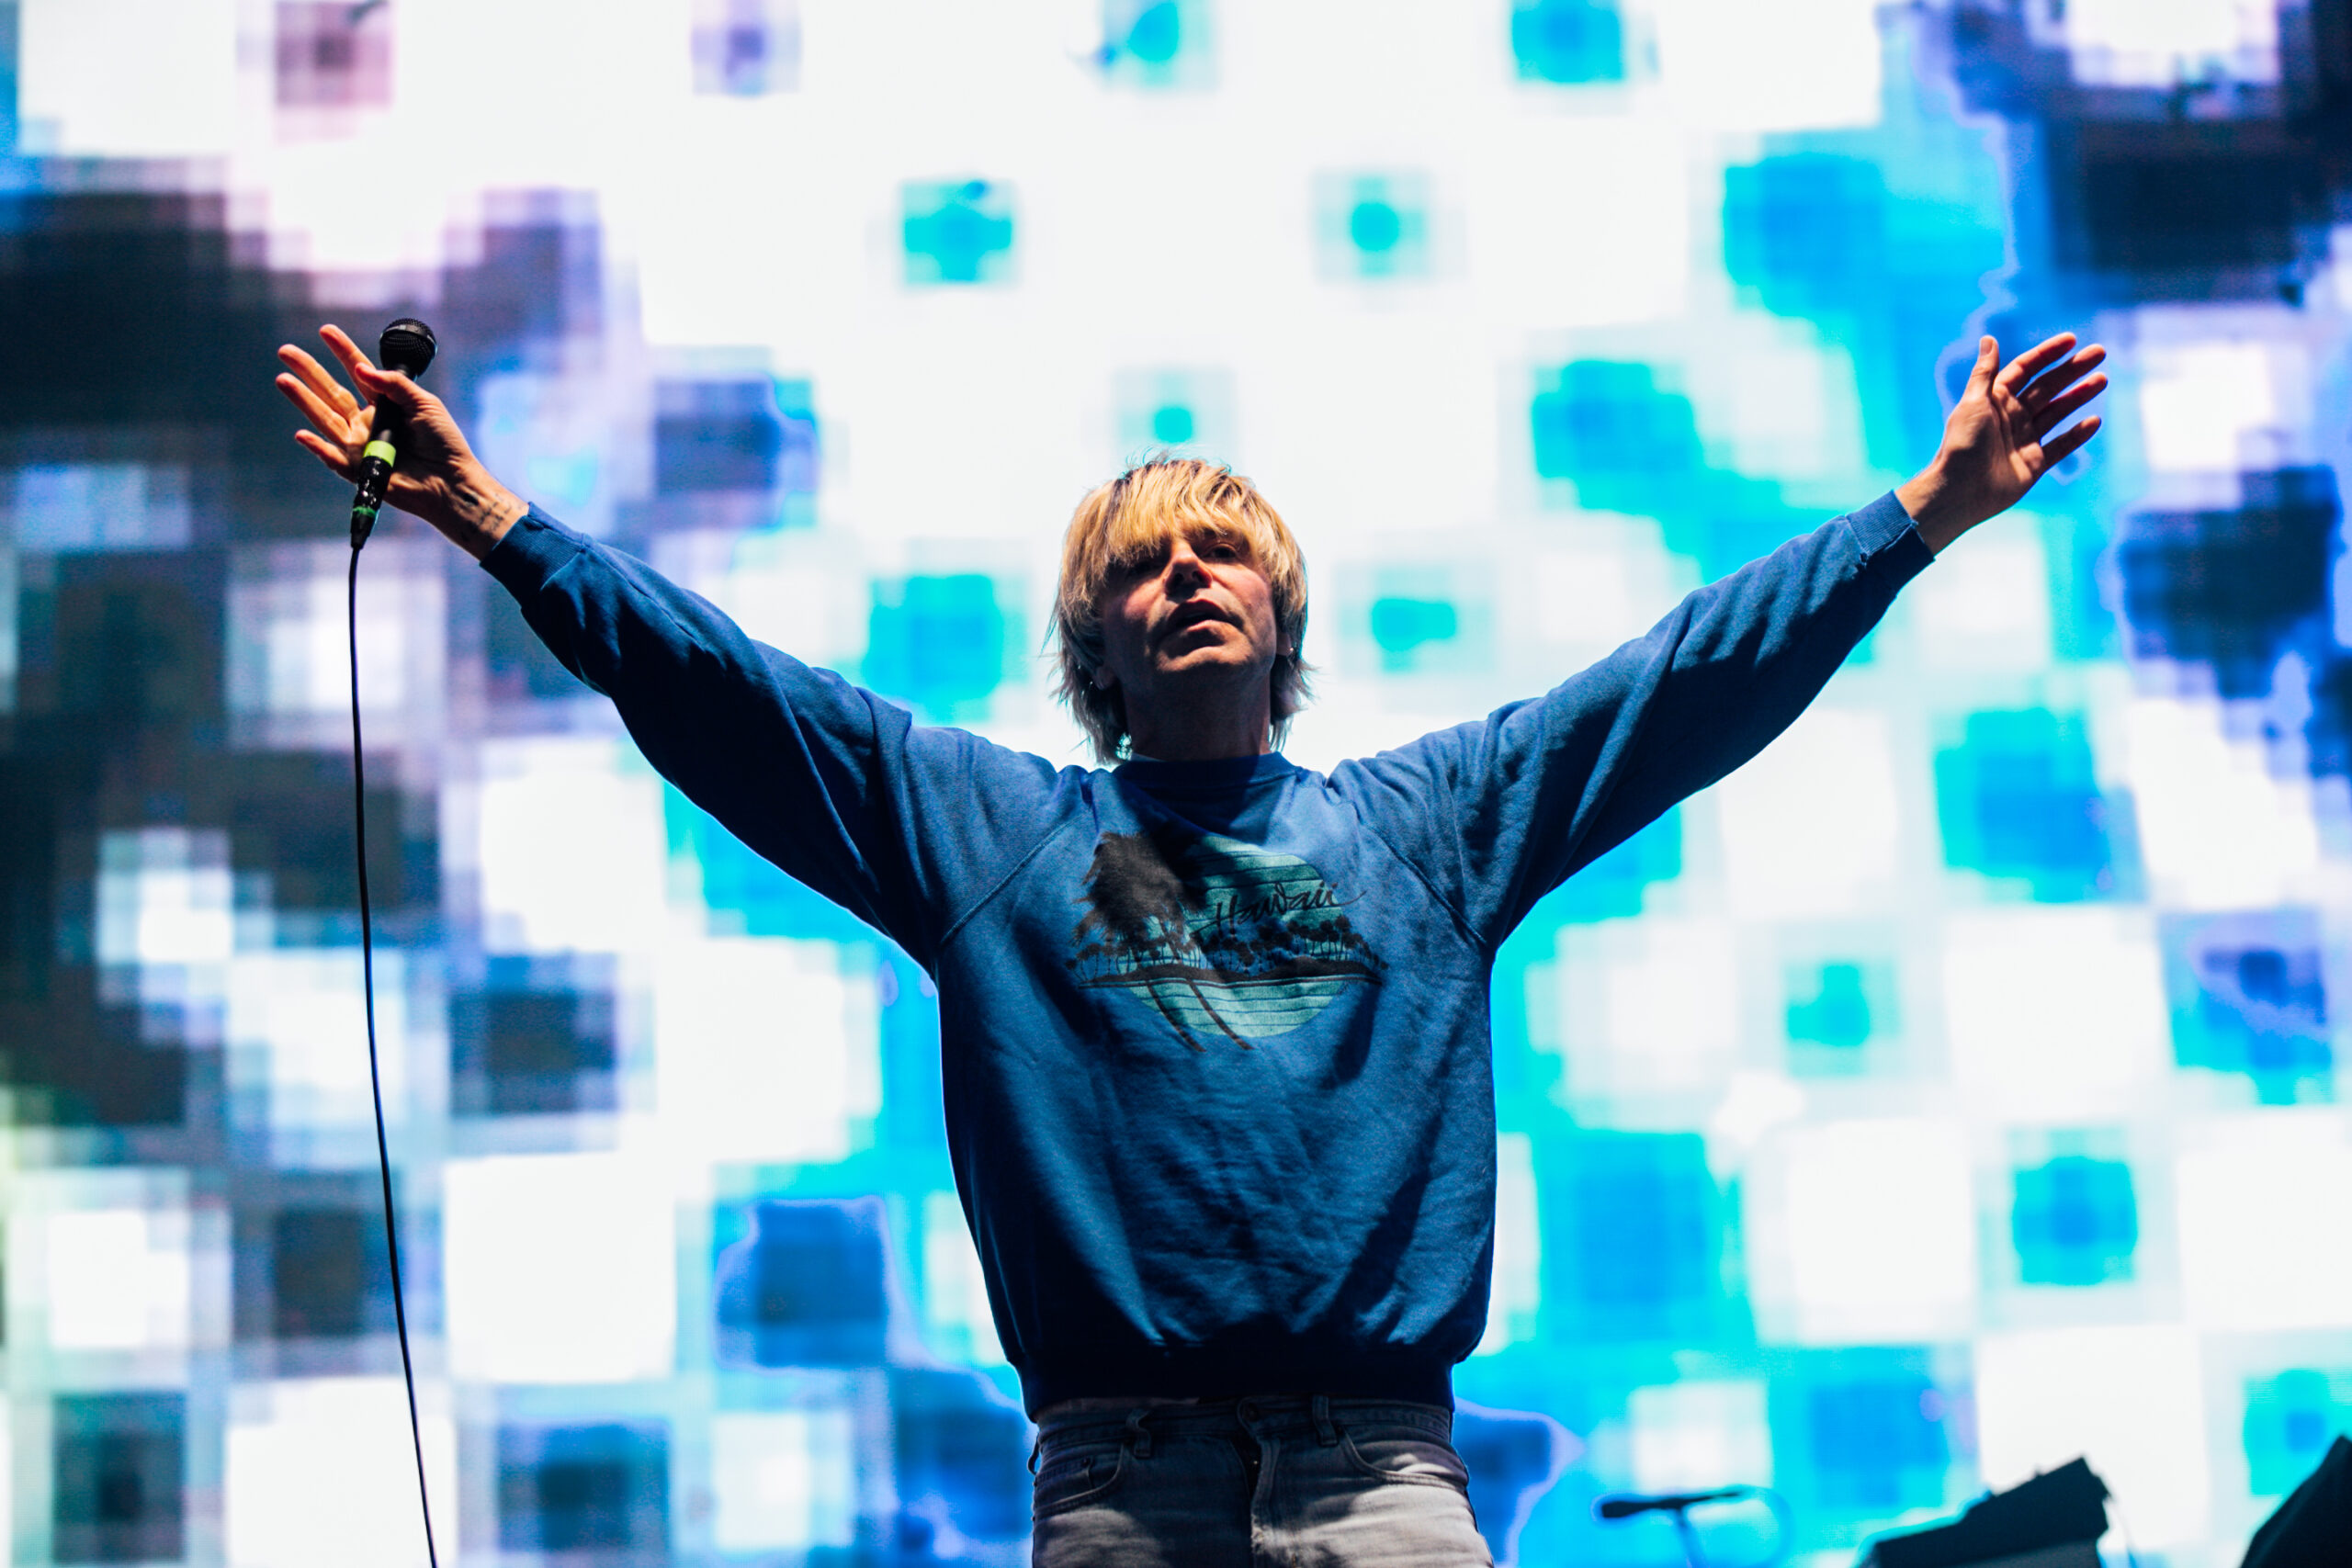 The Charlatans' Tim Burgess. Photo: Mike Lewis Photography / Redferns